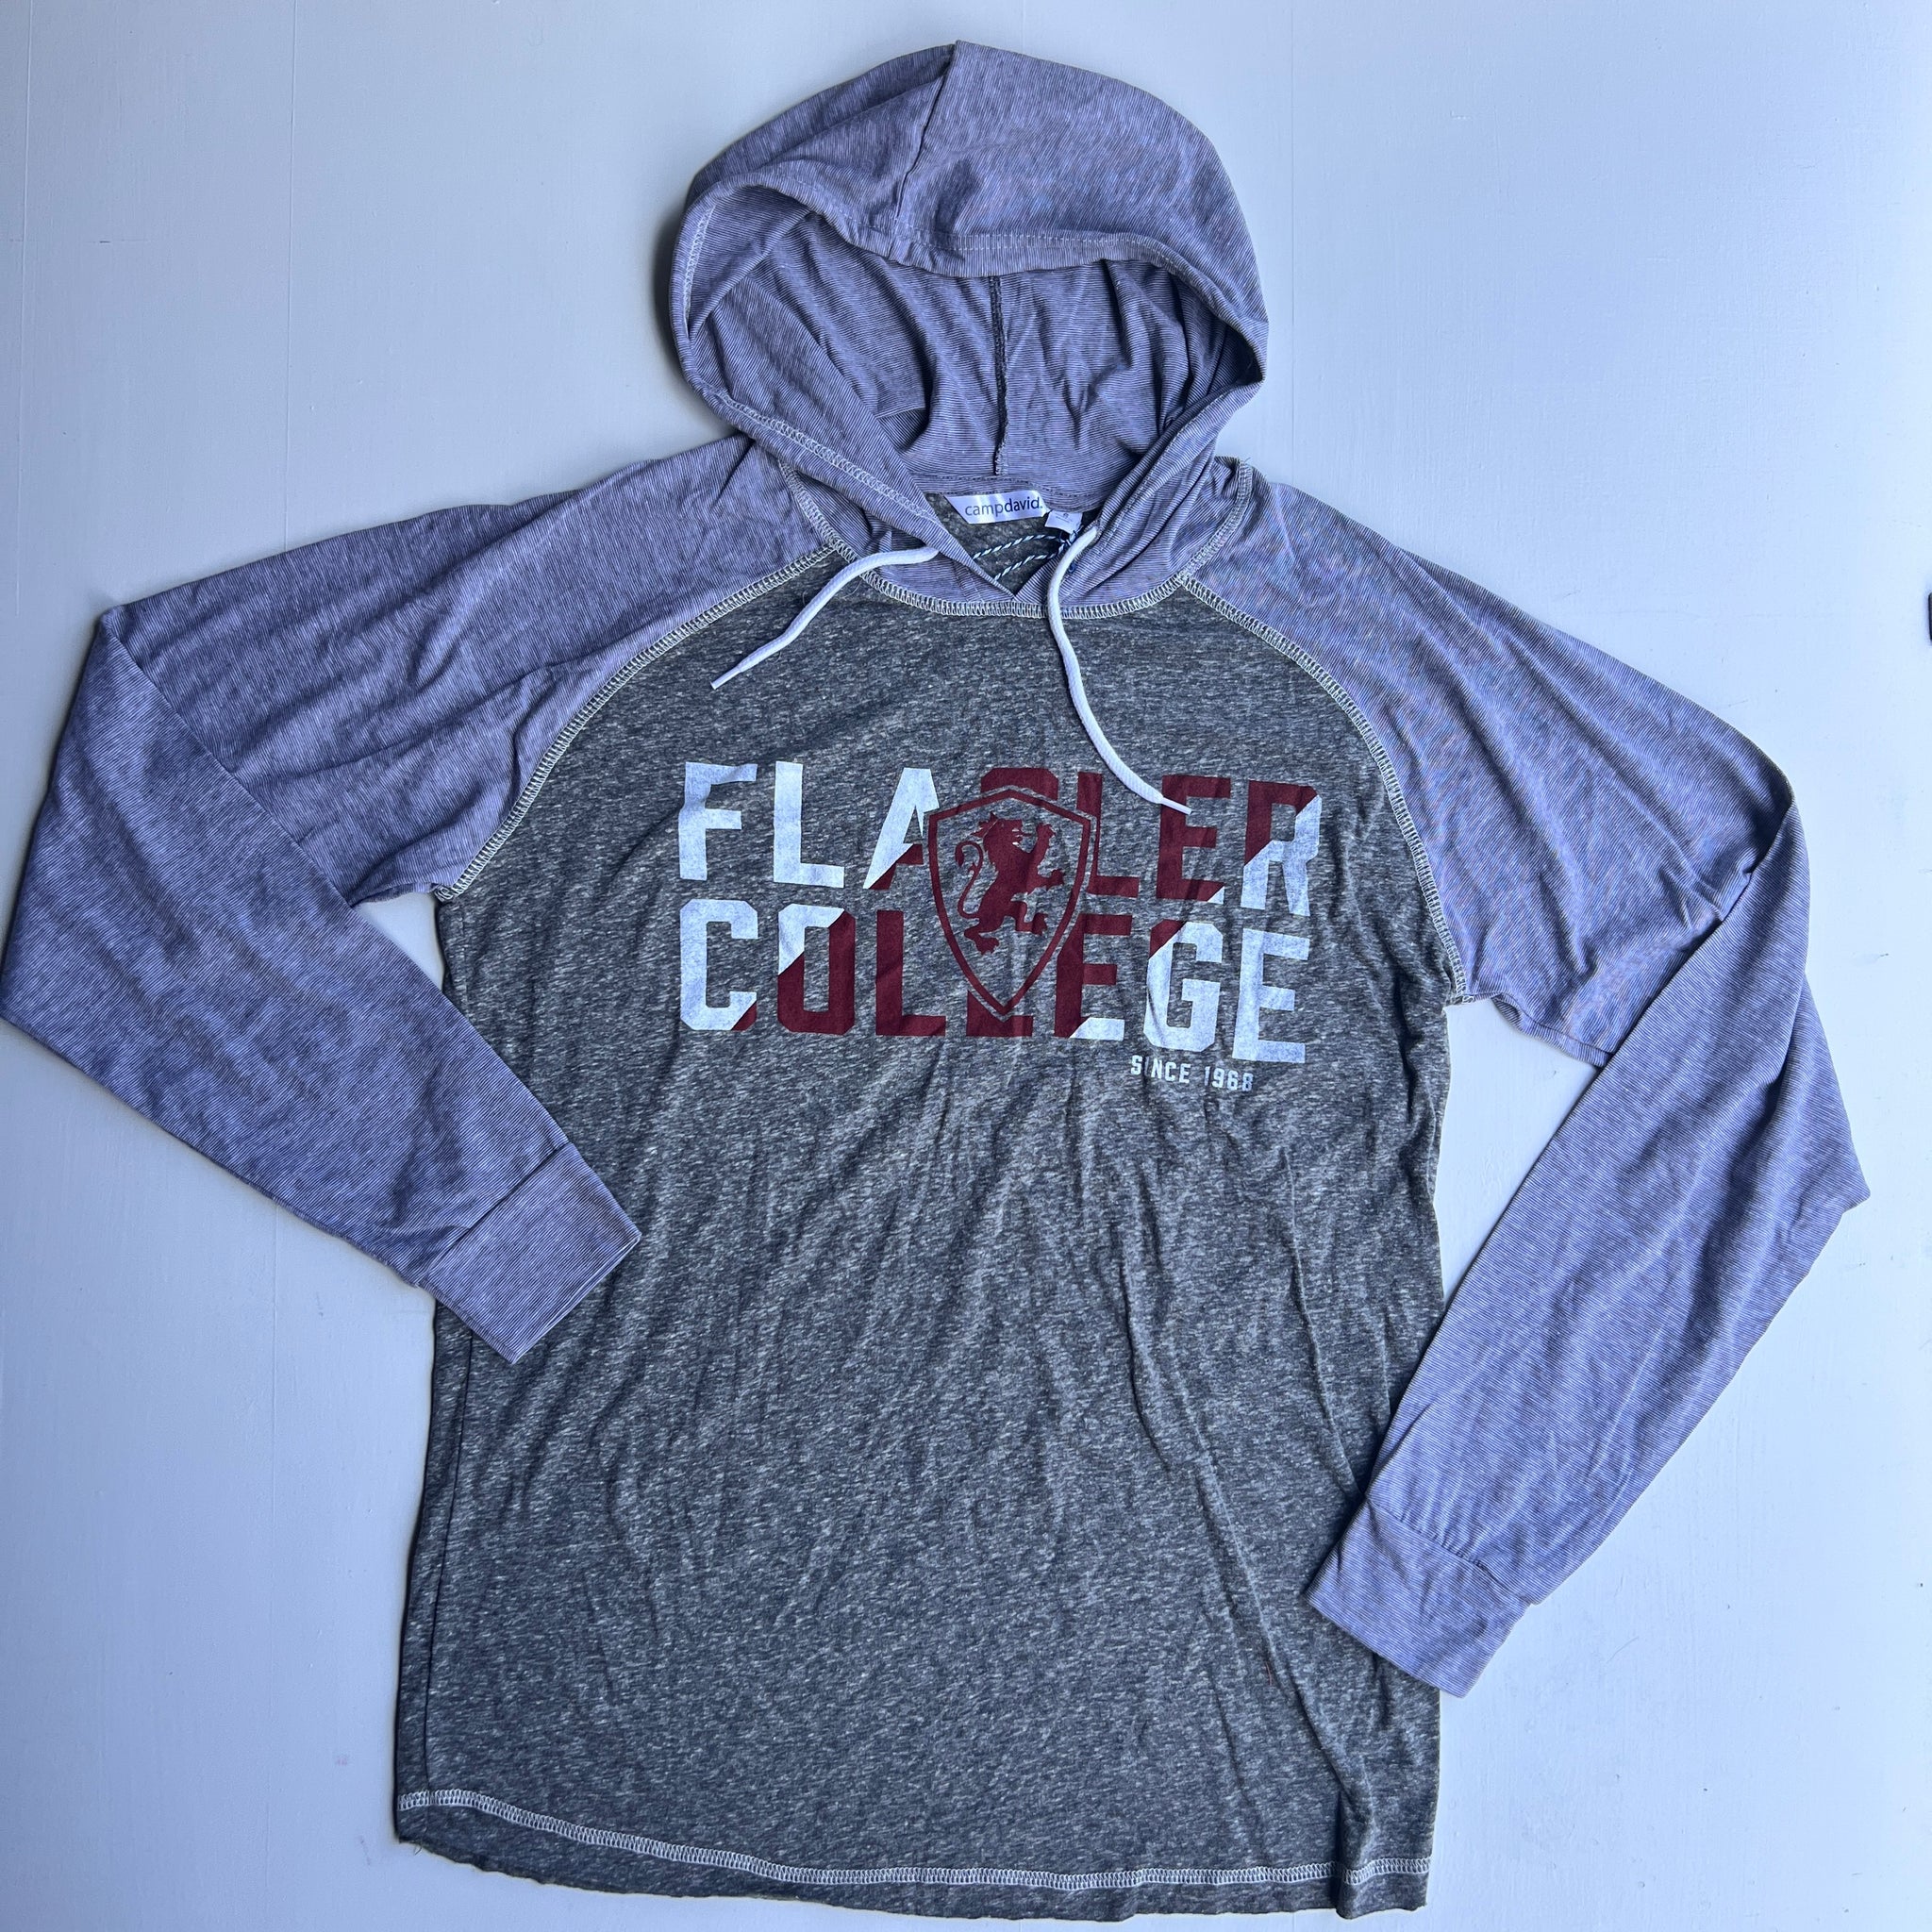 Grey lightweight  hooded sweatshirt with white and crimson imprint saying Flagler over Flagler College shield logo over College over since 1968